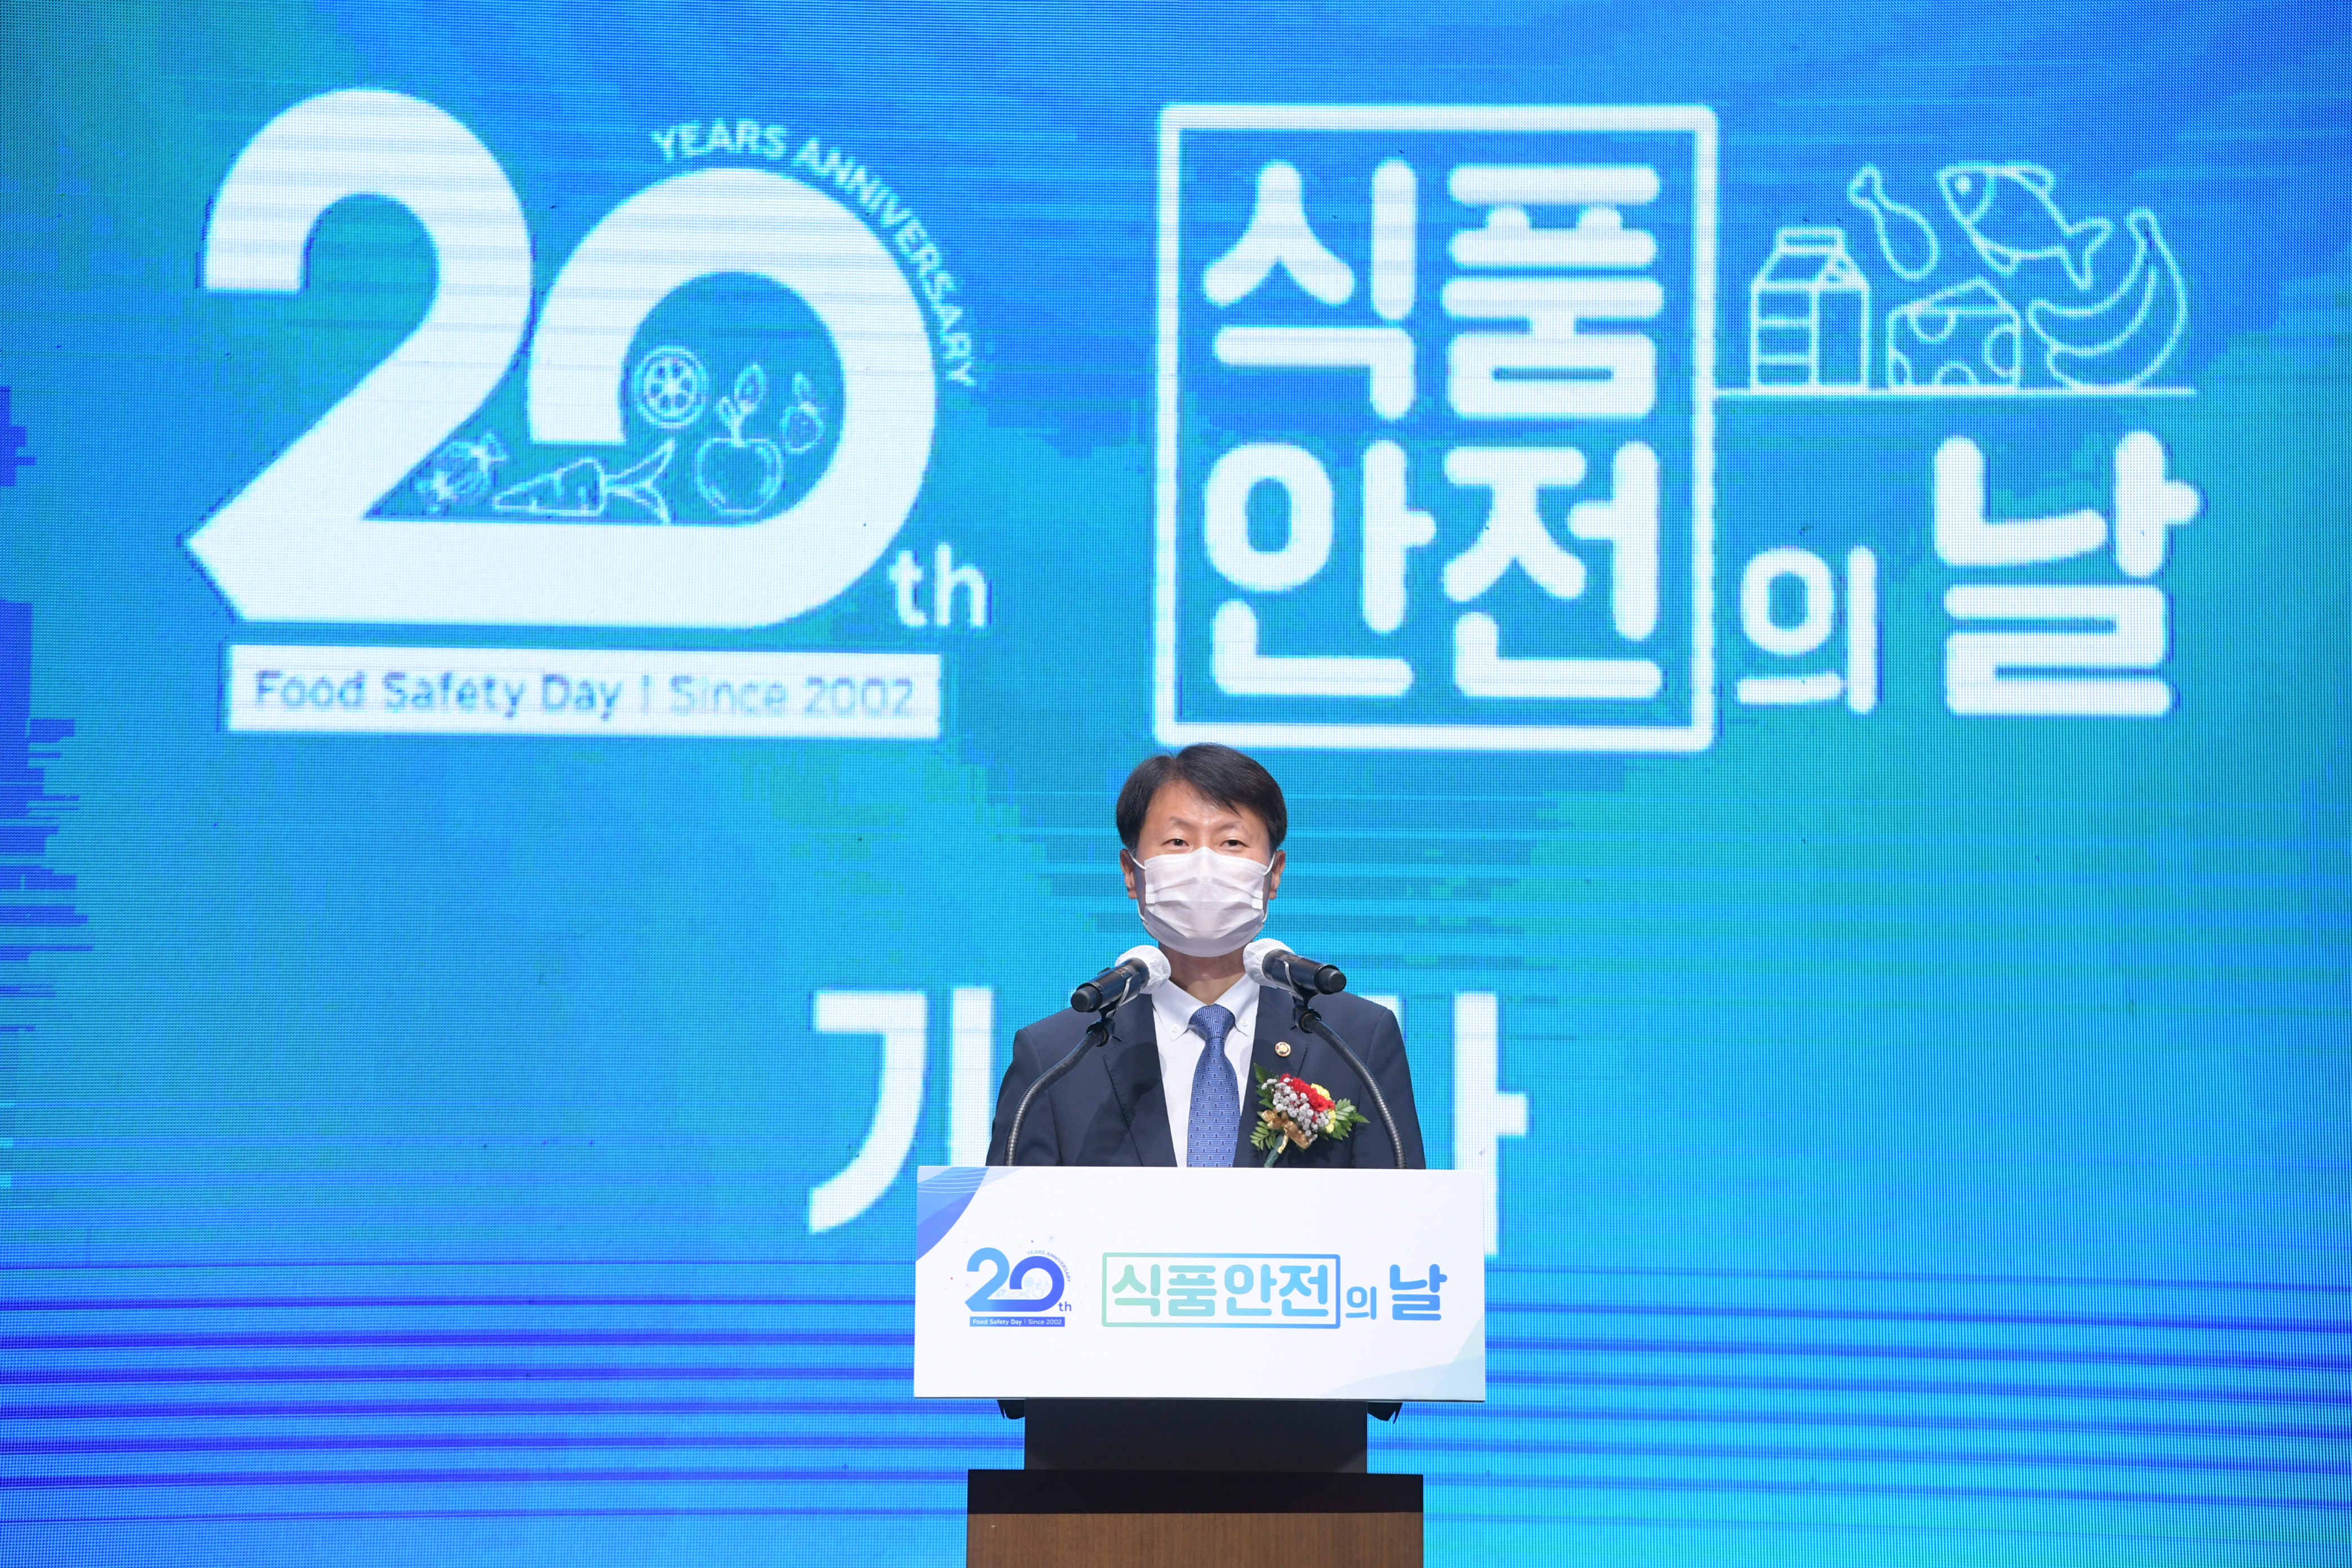 Photo News3 - [May 14, 2021] Minister attends the 20th Food Safety Day Ceremony